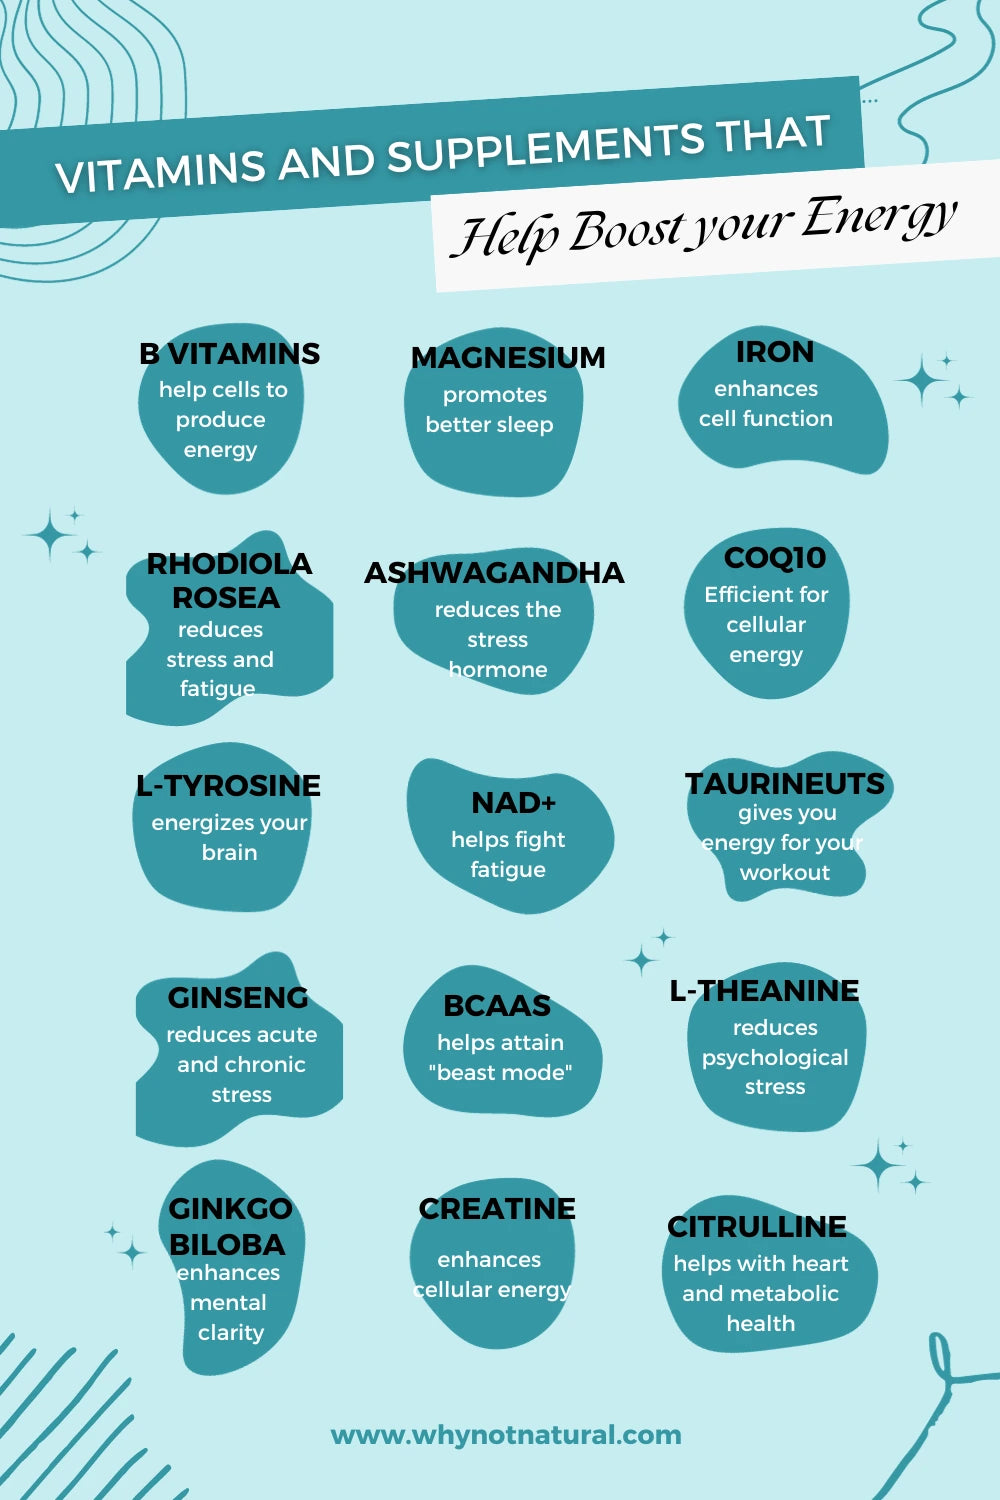 Vitamins and Supplements that Help Boost your Energy